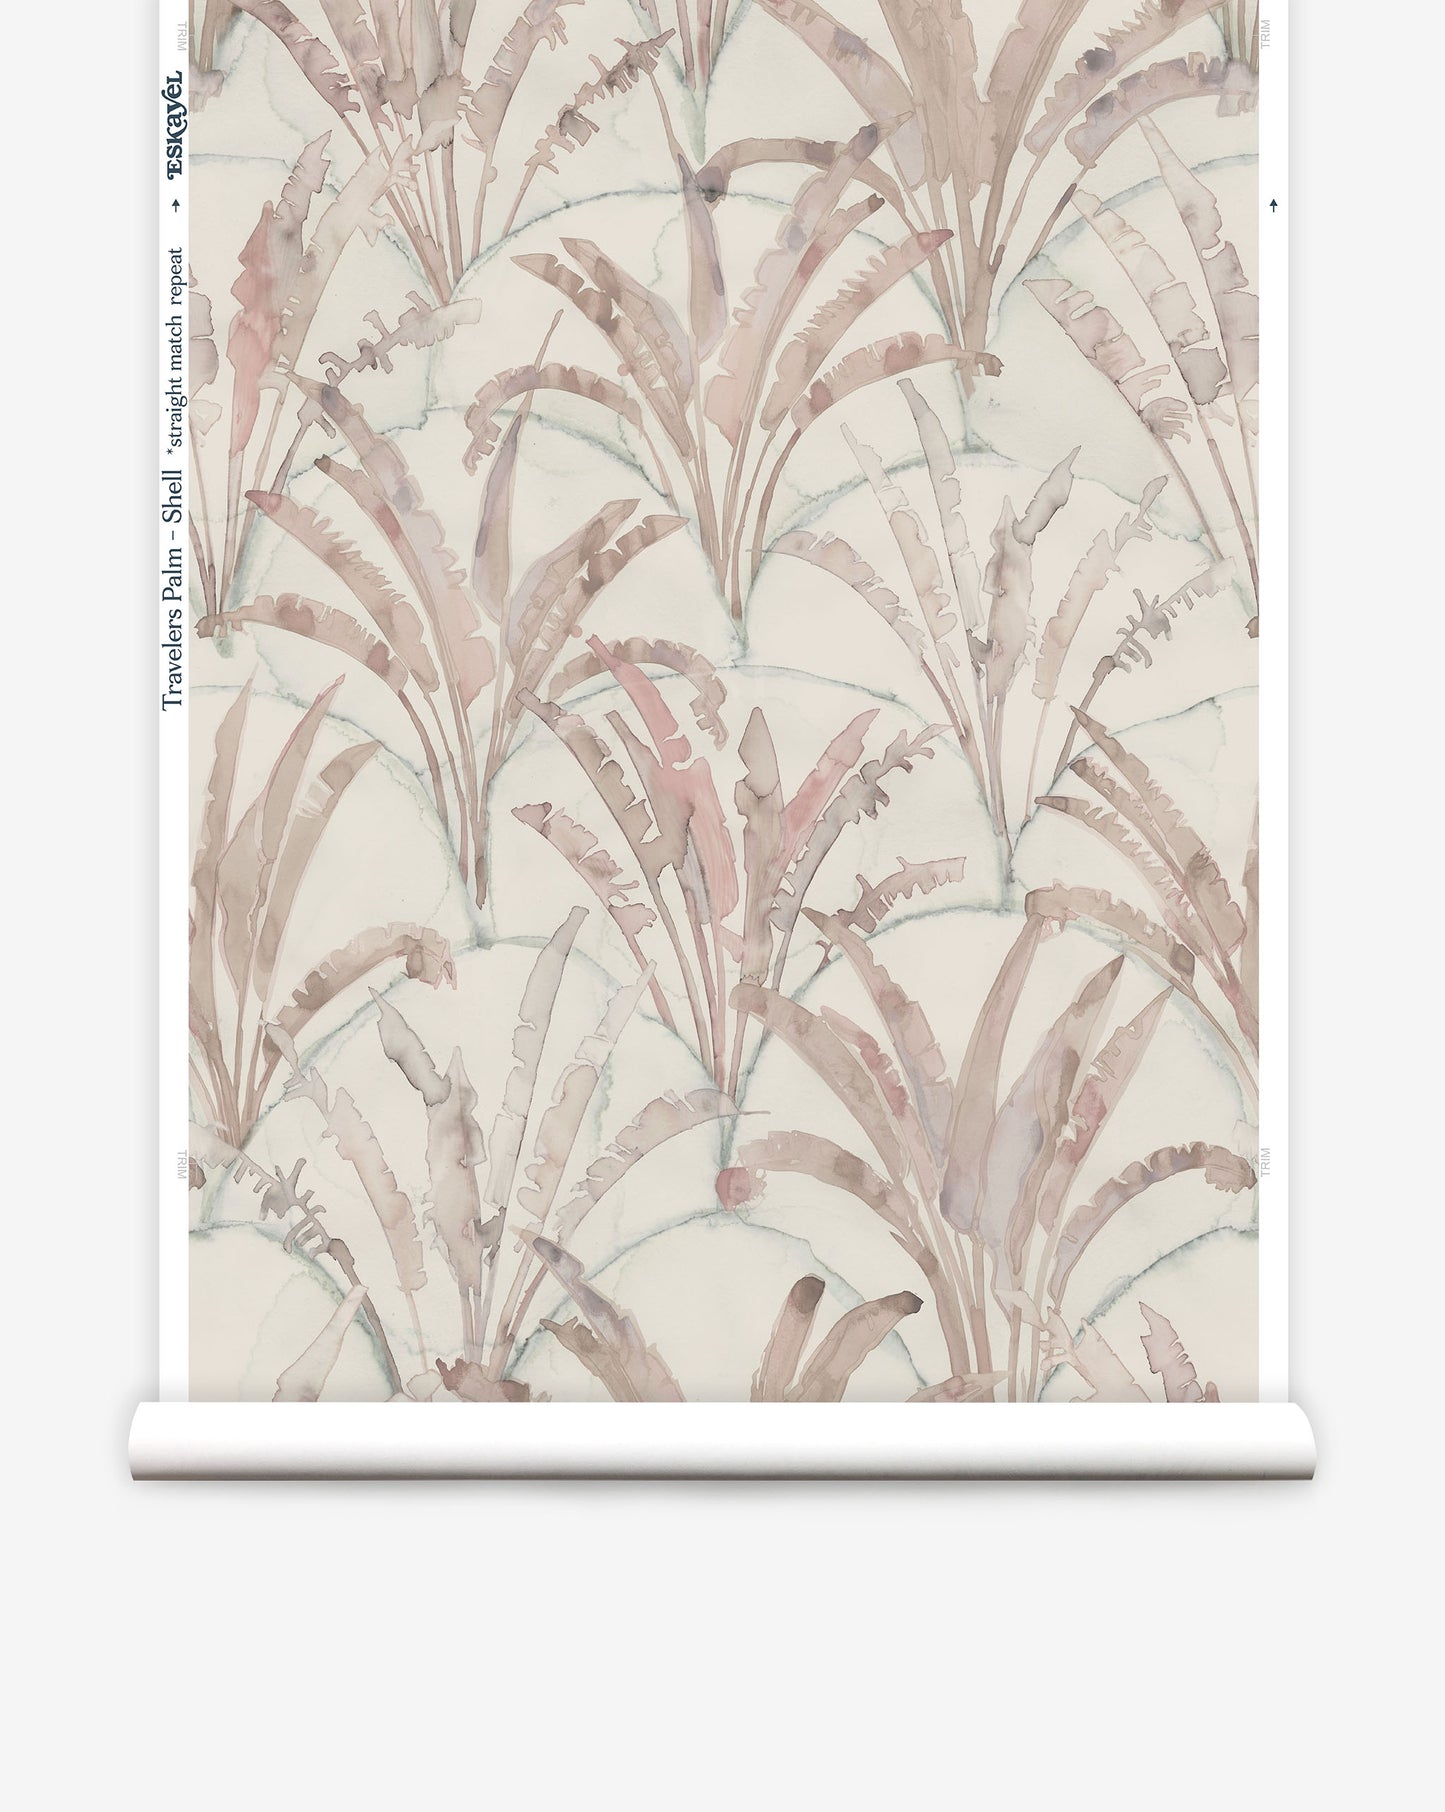 Travelers Palm is a pattern of palm trees on overlapping scallops In Shell, the colorway is dusty rose on beige